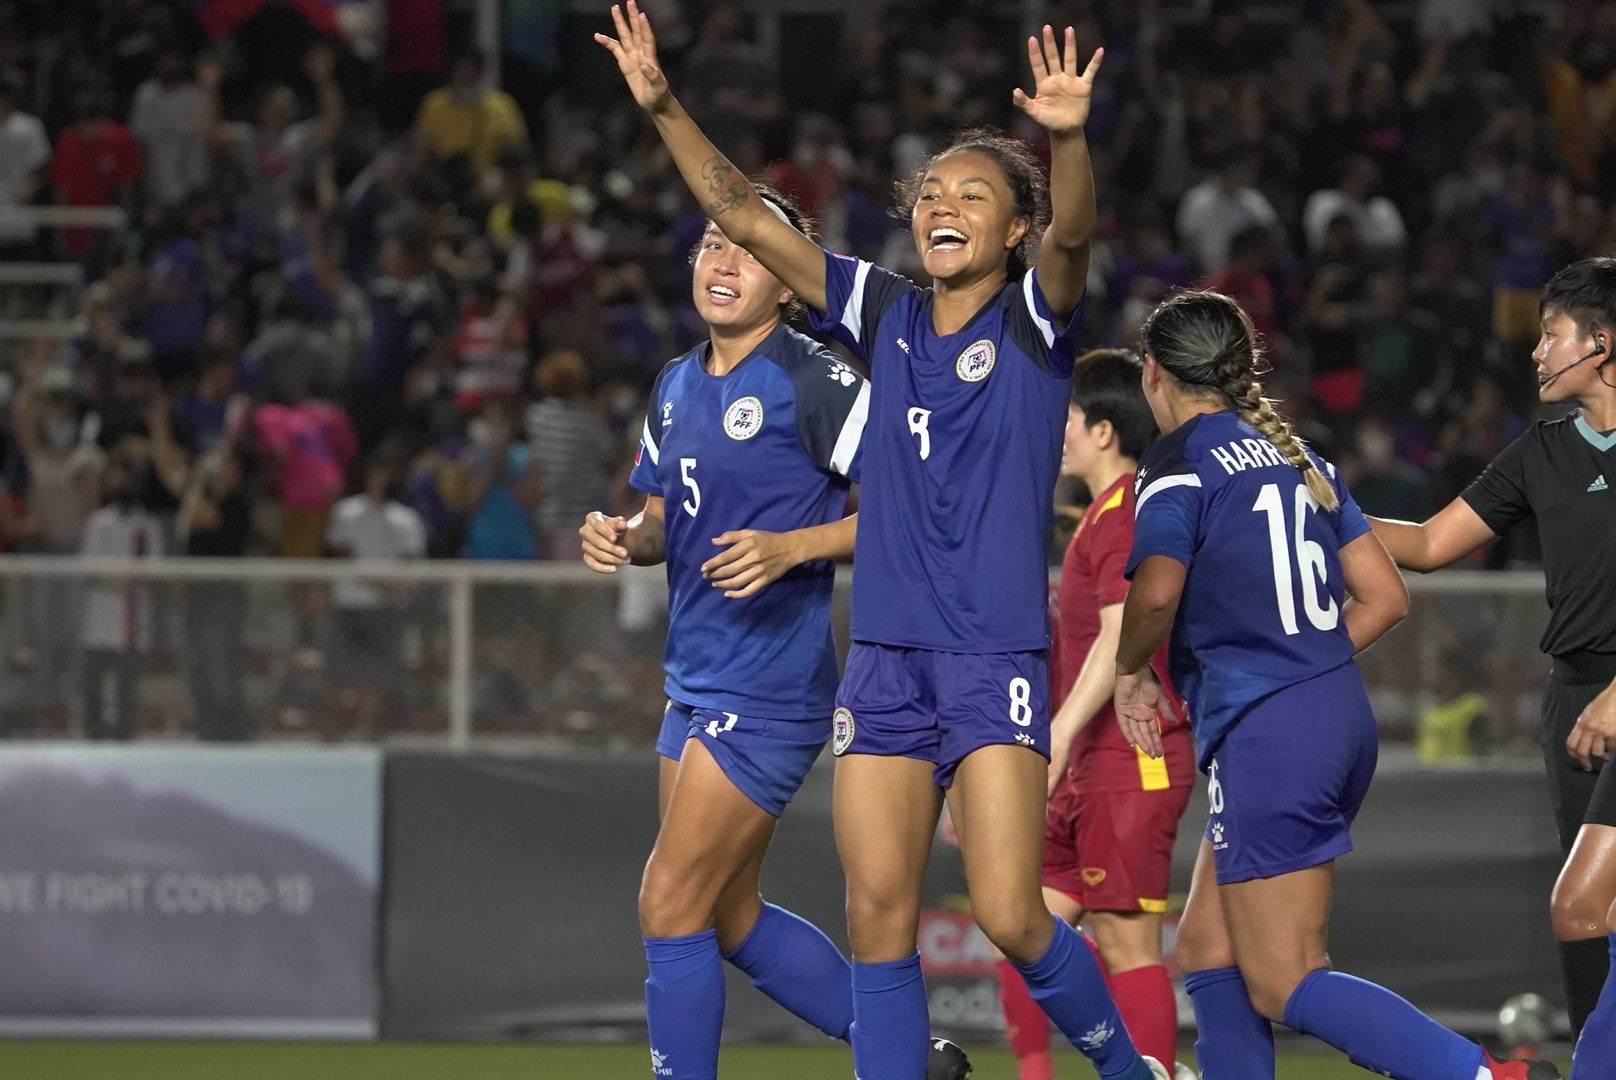 ‘Most complete performance’: Filipinas end Vietnam hoodoo to reach title match